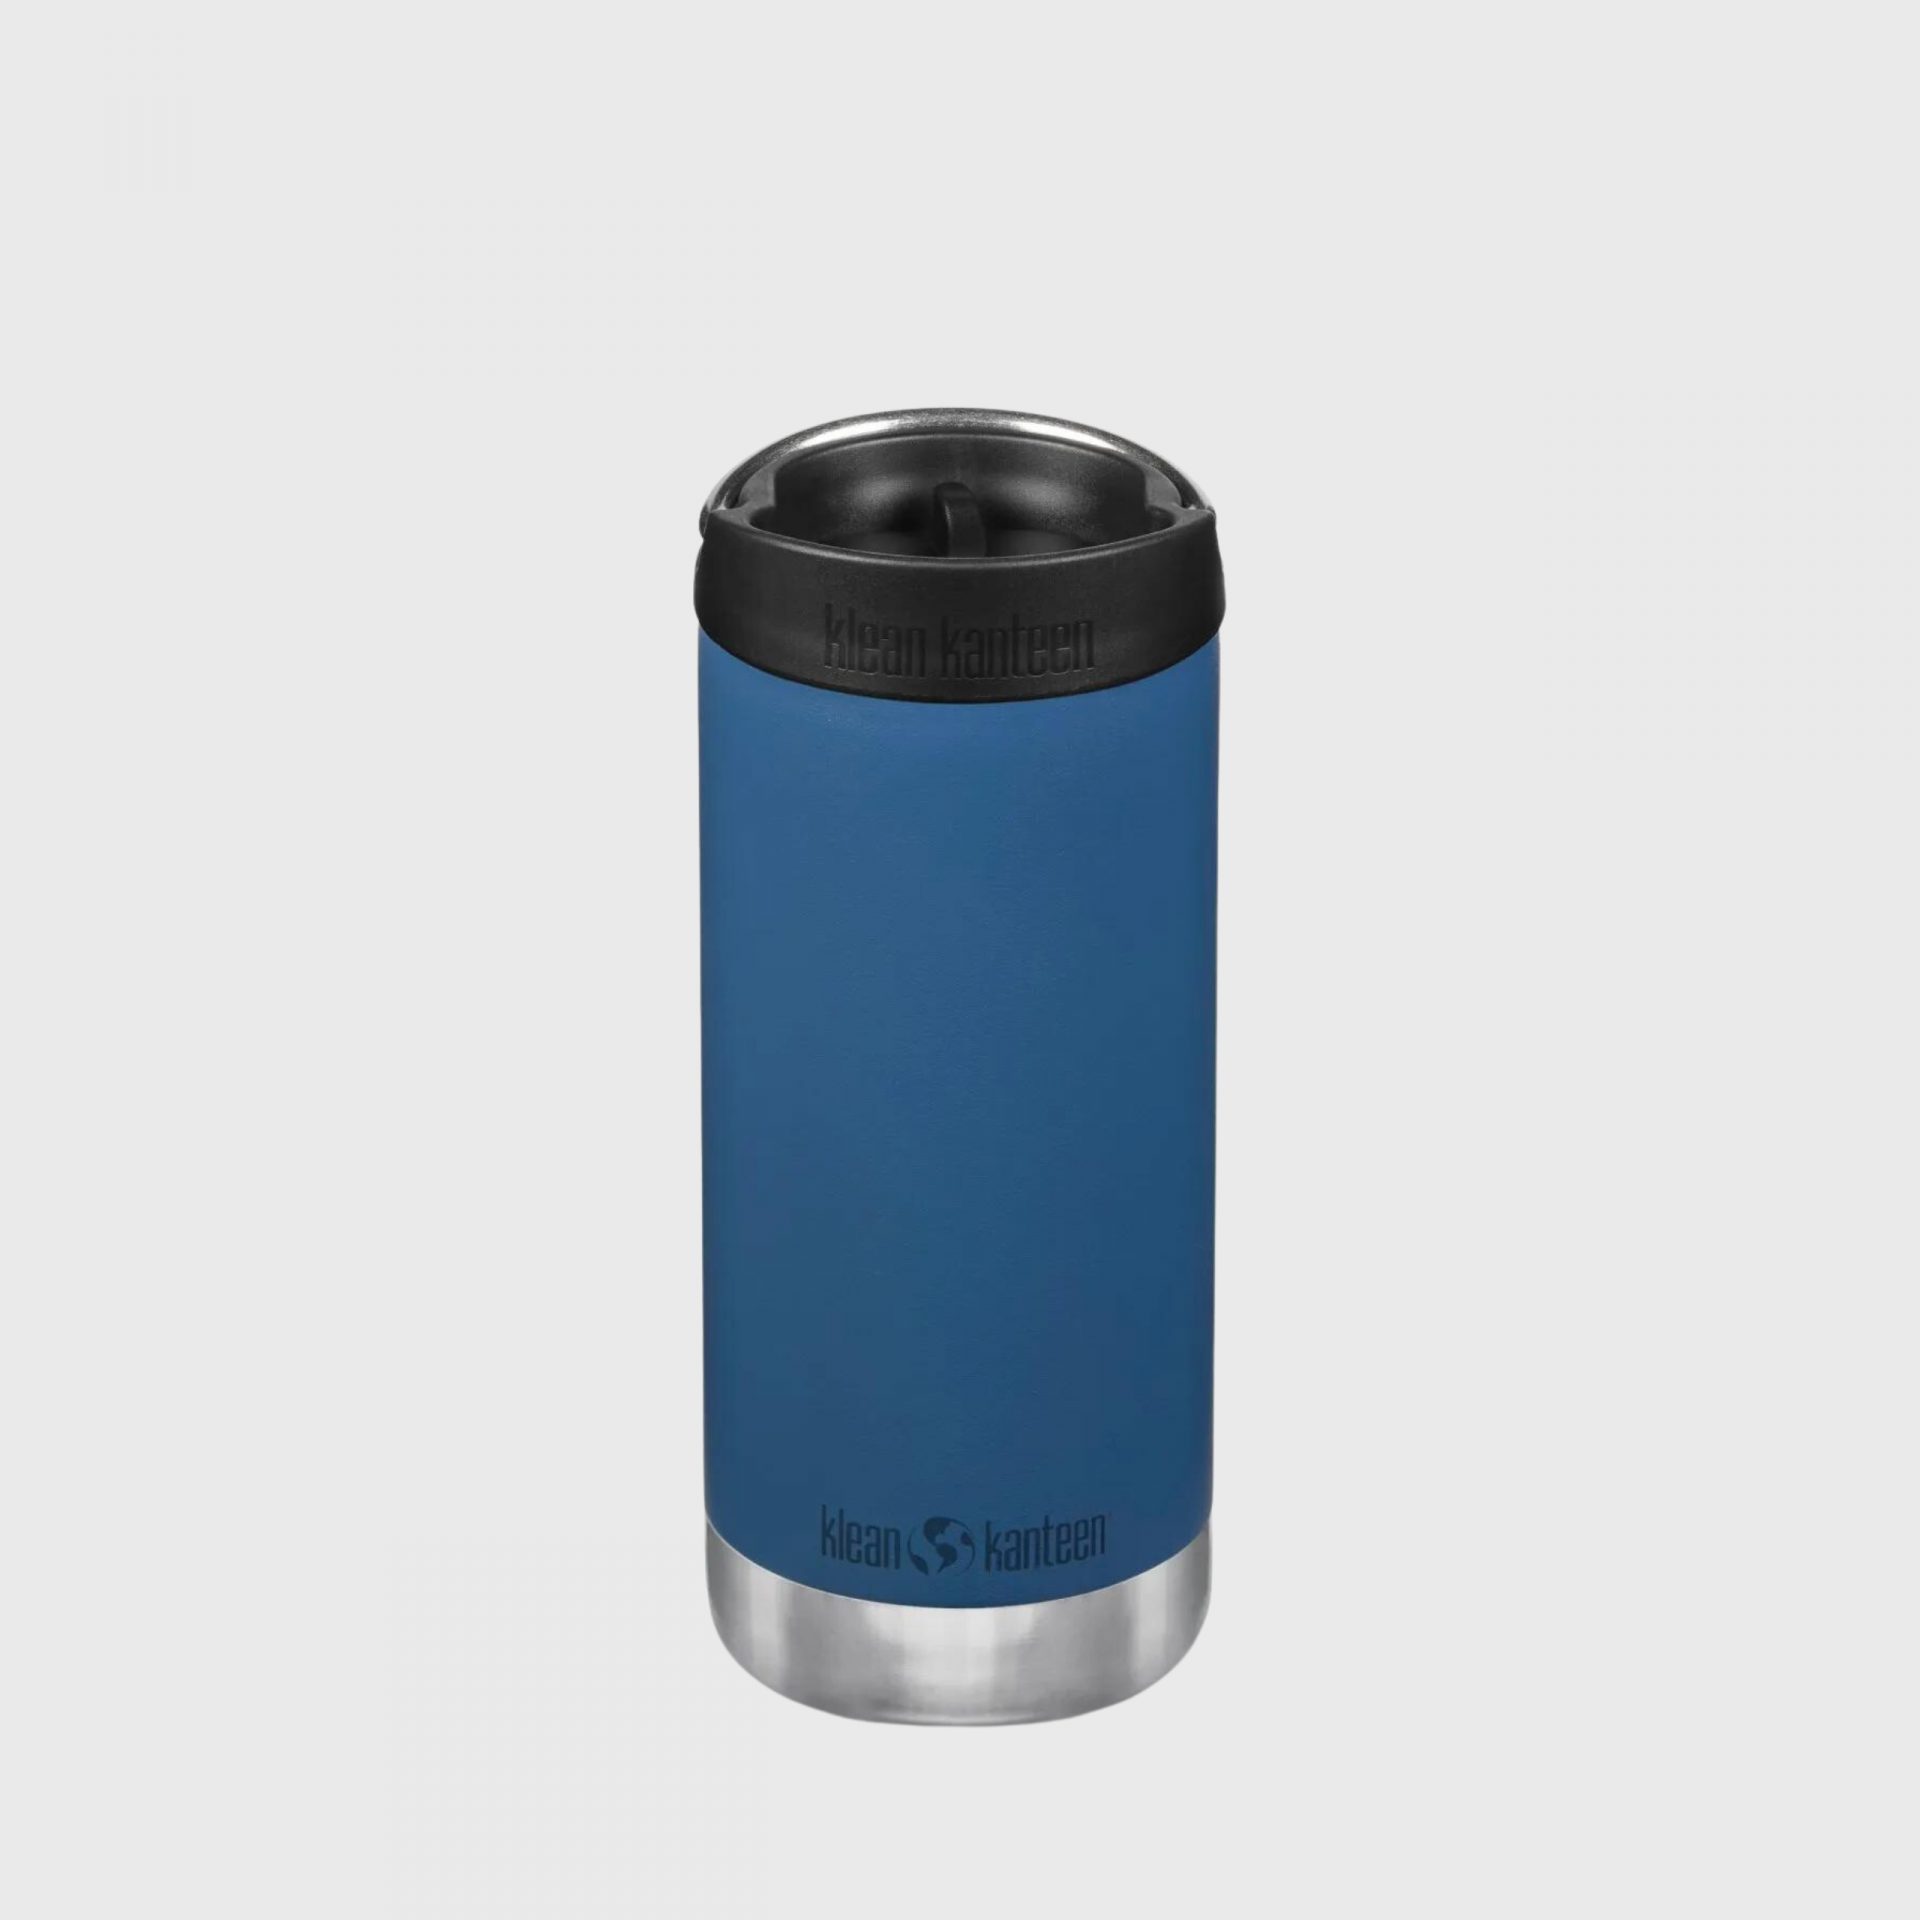 Klean Kanteen Singapore Sustainable Corporate Gifts 12 oz TKWide Insulated Coffee Tumbler with Café Cap Blue